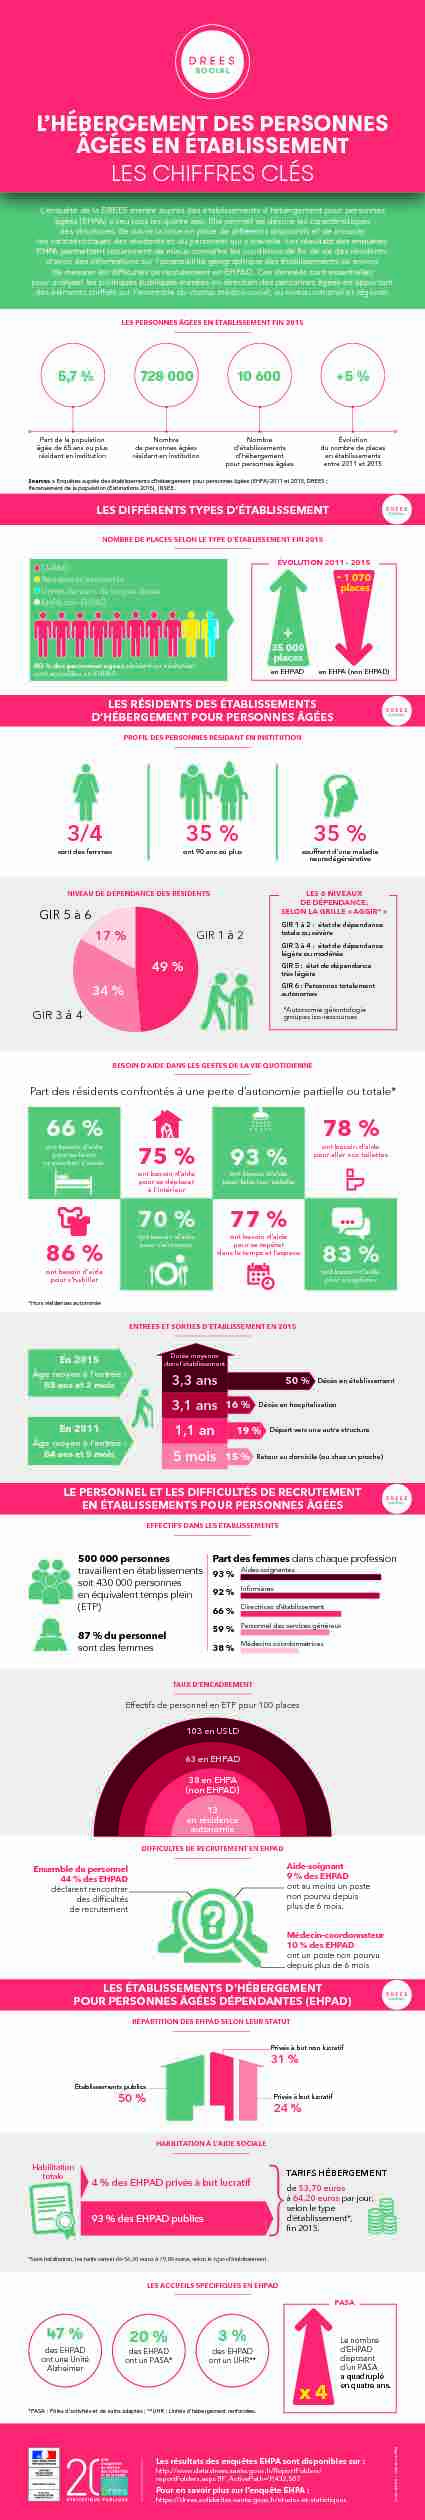 [PDF] Infographie EHPA 08indd - Drees